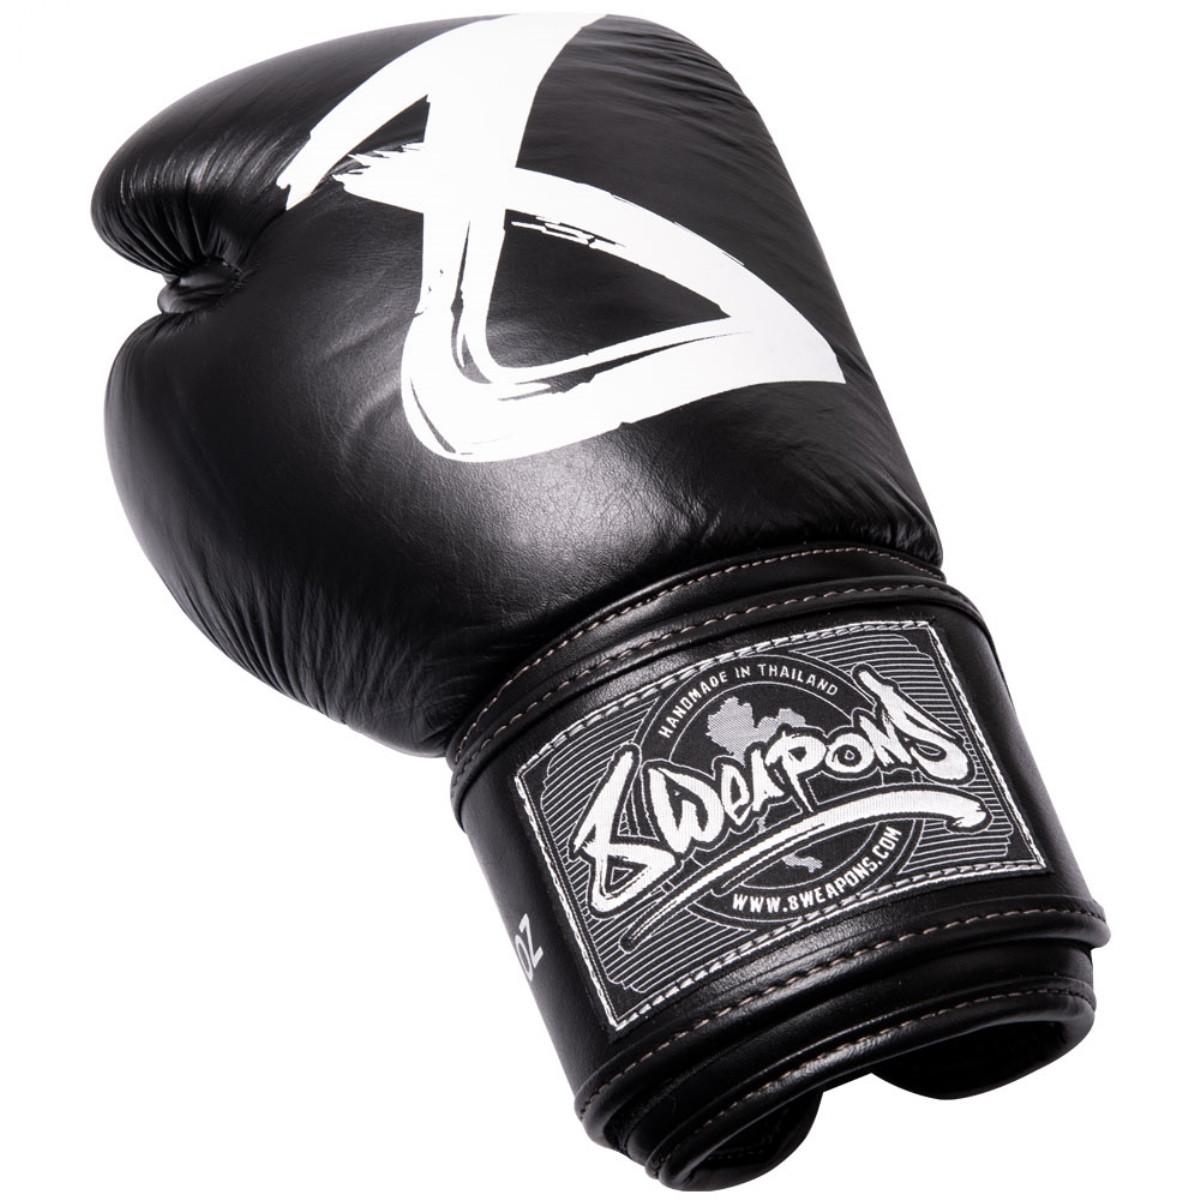 8WEAPONS  8 Weapons Boxing Gloves - BIG 8 Premium 